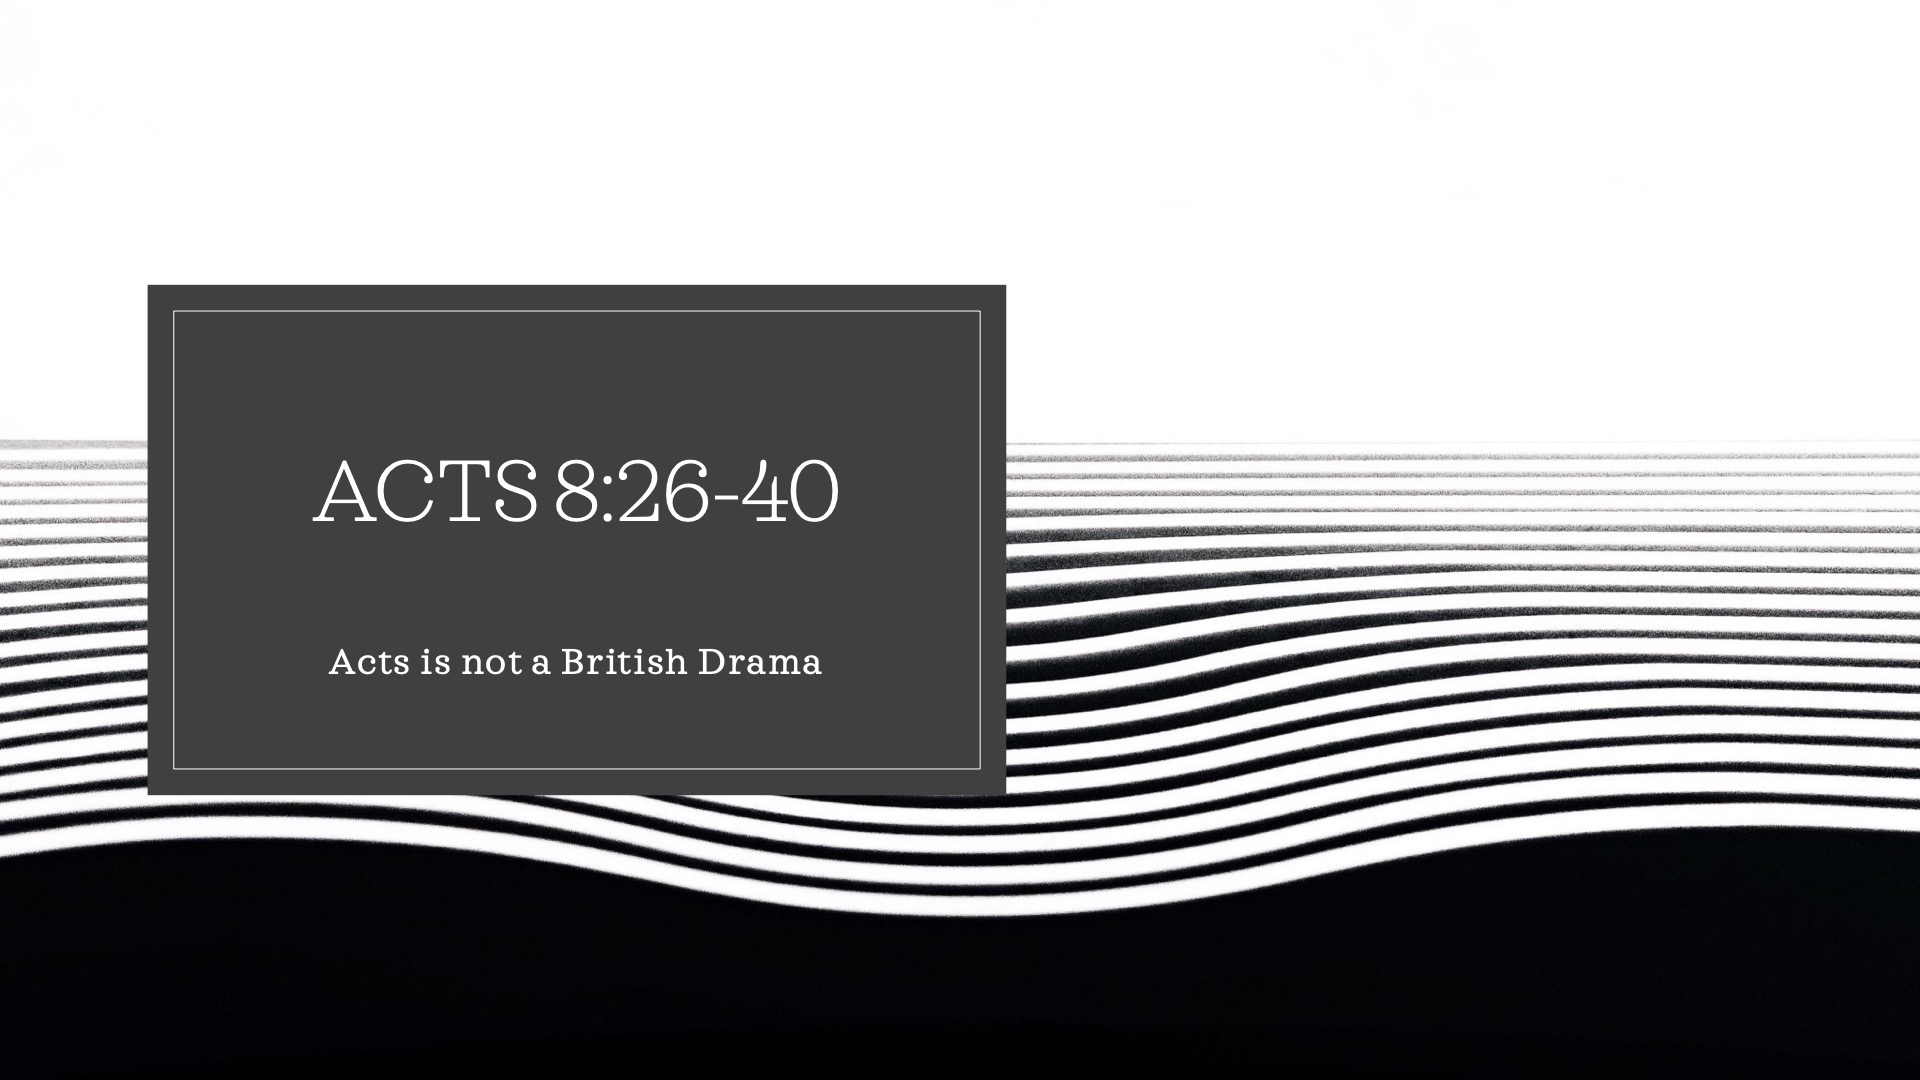 Acts is not a British Drama